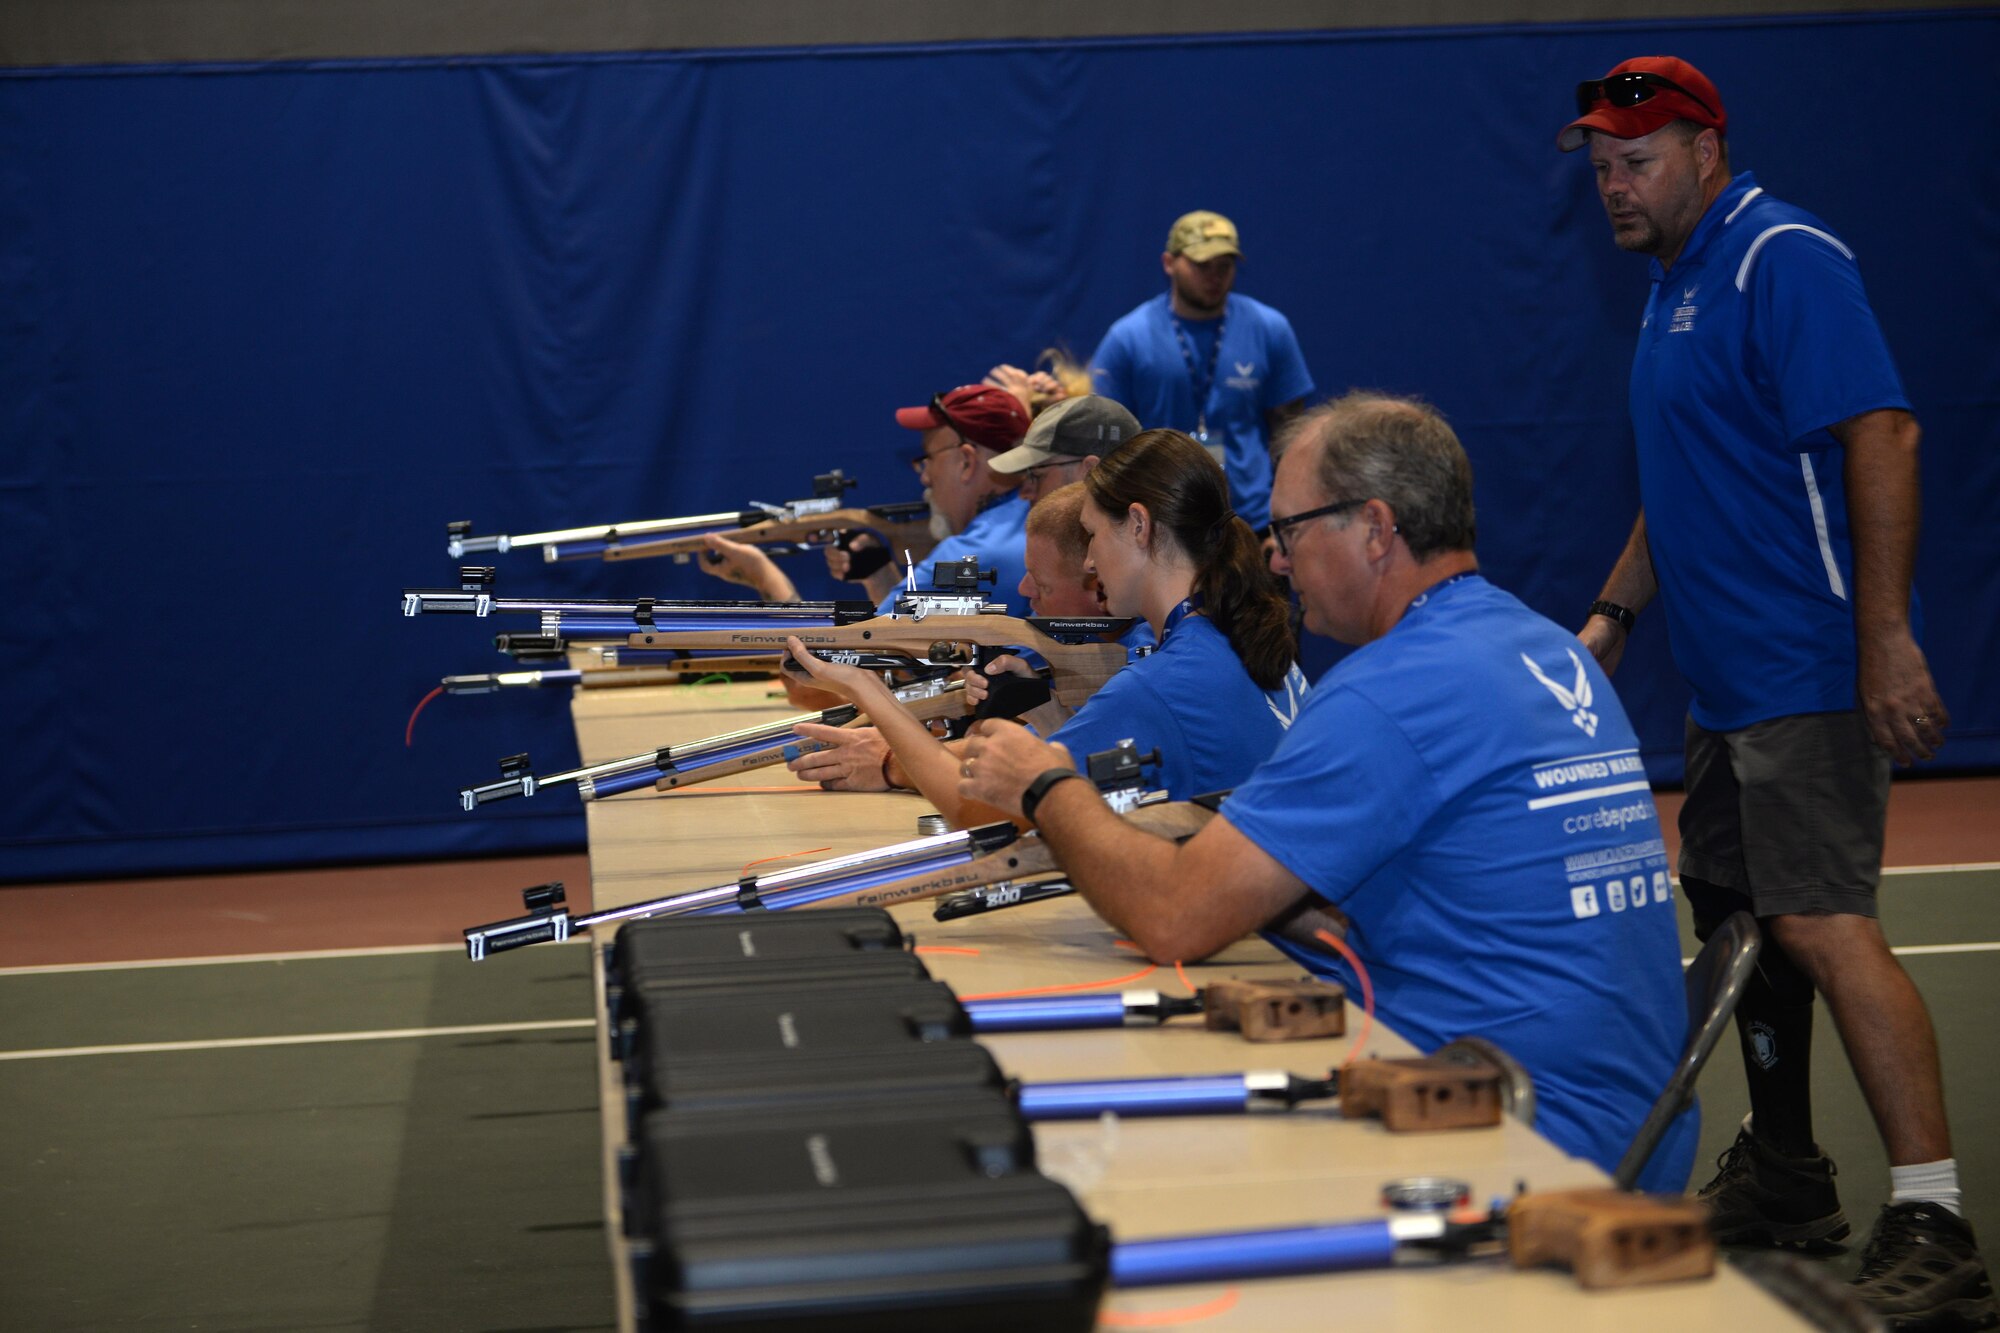 Coach Dan Duitsman, works with Wounded Warriors as they practice their shooting skills at the Offutt Field House. Wounded warriors members from across the country participated in a special camp focused on recovery. More than 120 participated in hopes to aid with their healing process with events like archery, swimming, basketball and more at Offutt Air Force Base, Nebraska, Sept. 17 - 23. (U.S. Air Force photo by Jeff W. Gates)